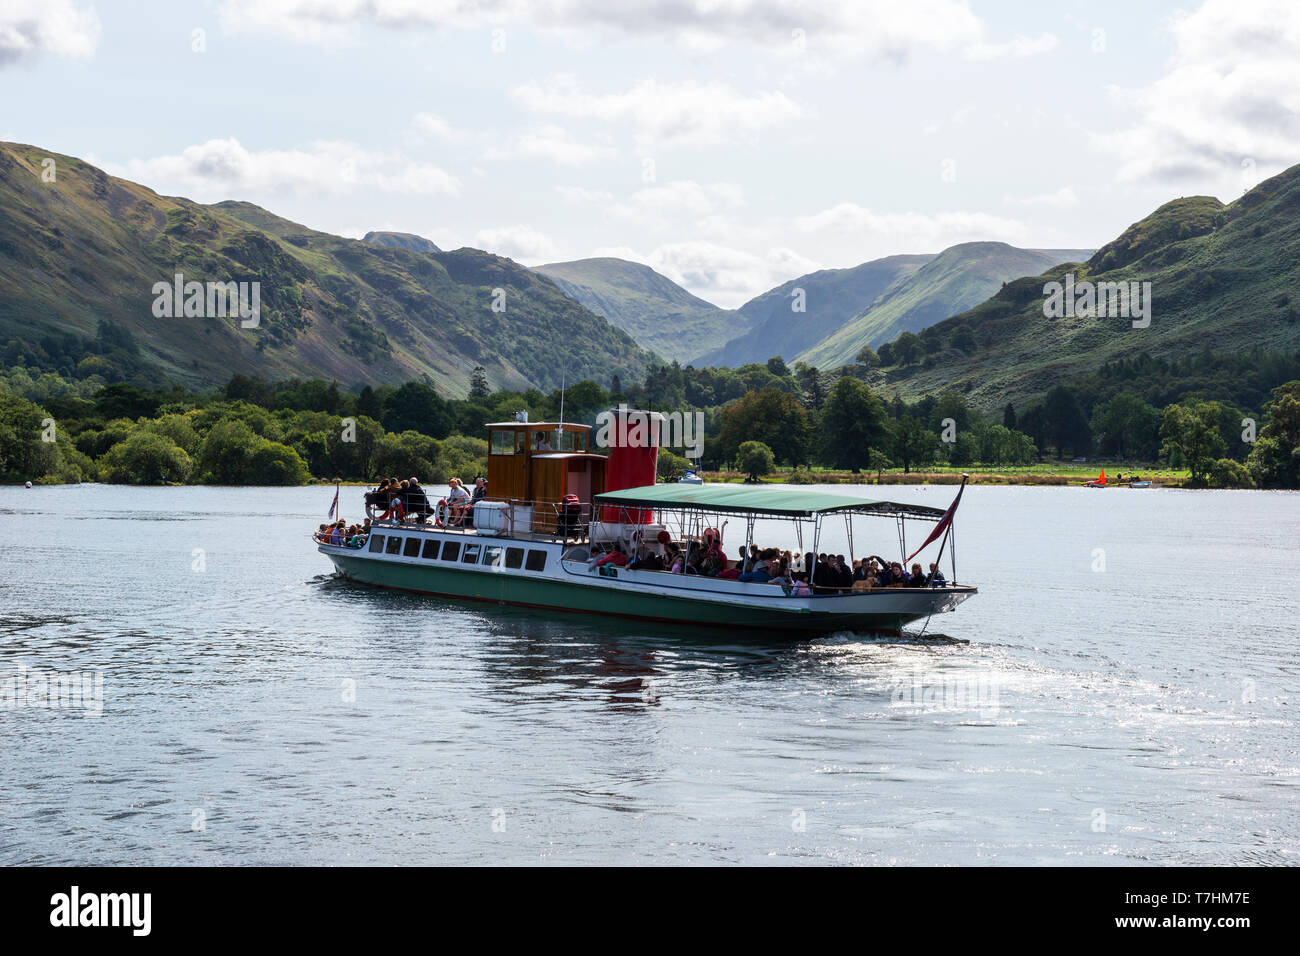 Lake steamer “Lady of the Lake” departing Glenridding pier on Ullswater in the Lake District National Park, Cumbria, England, UK Stock Photo